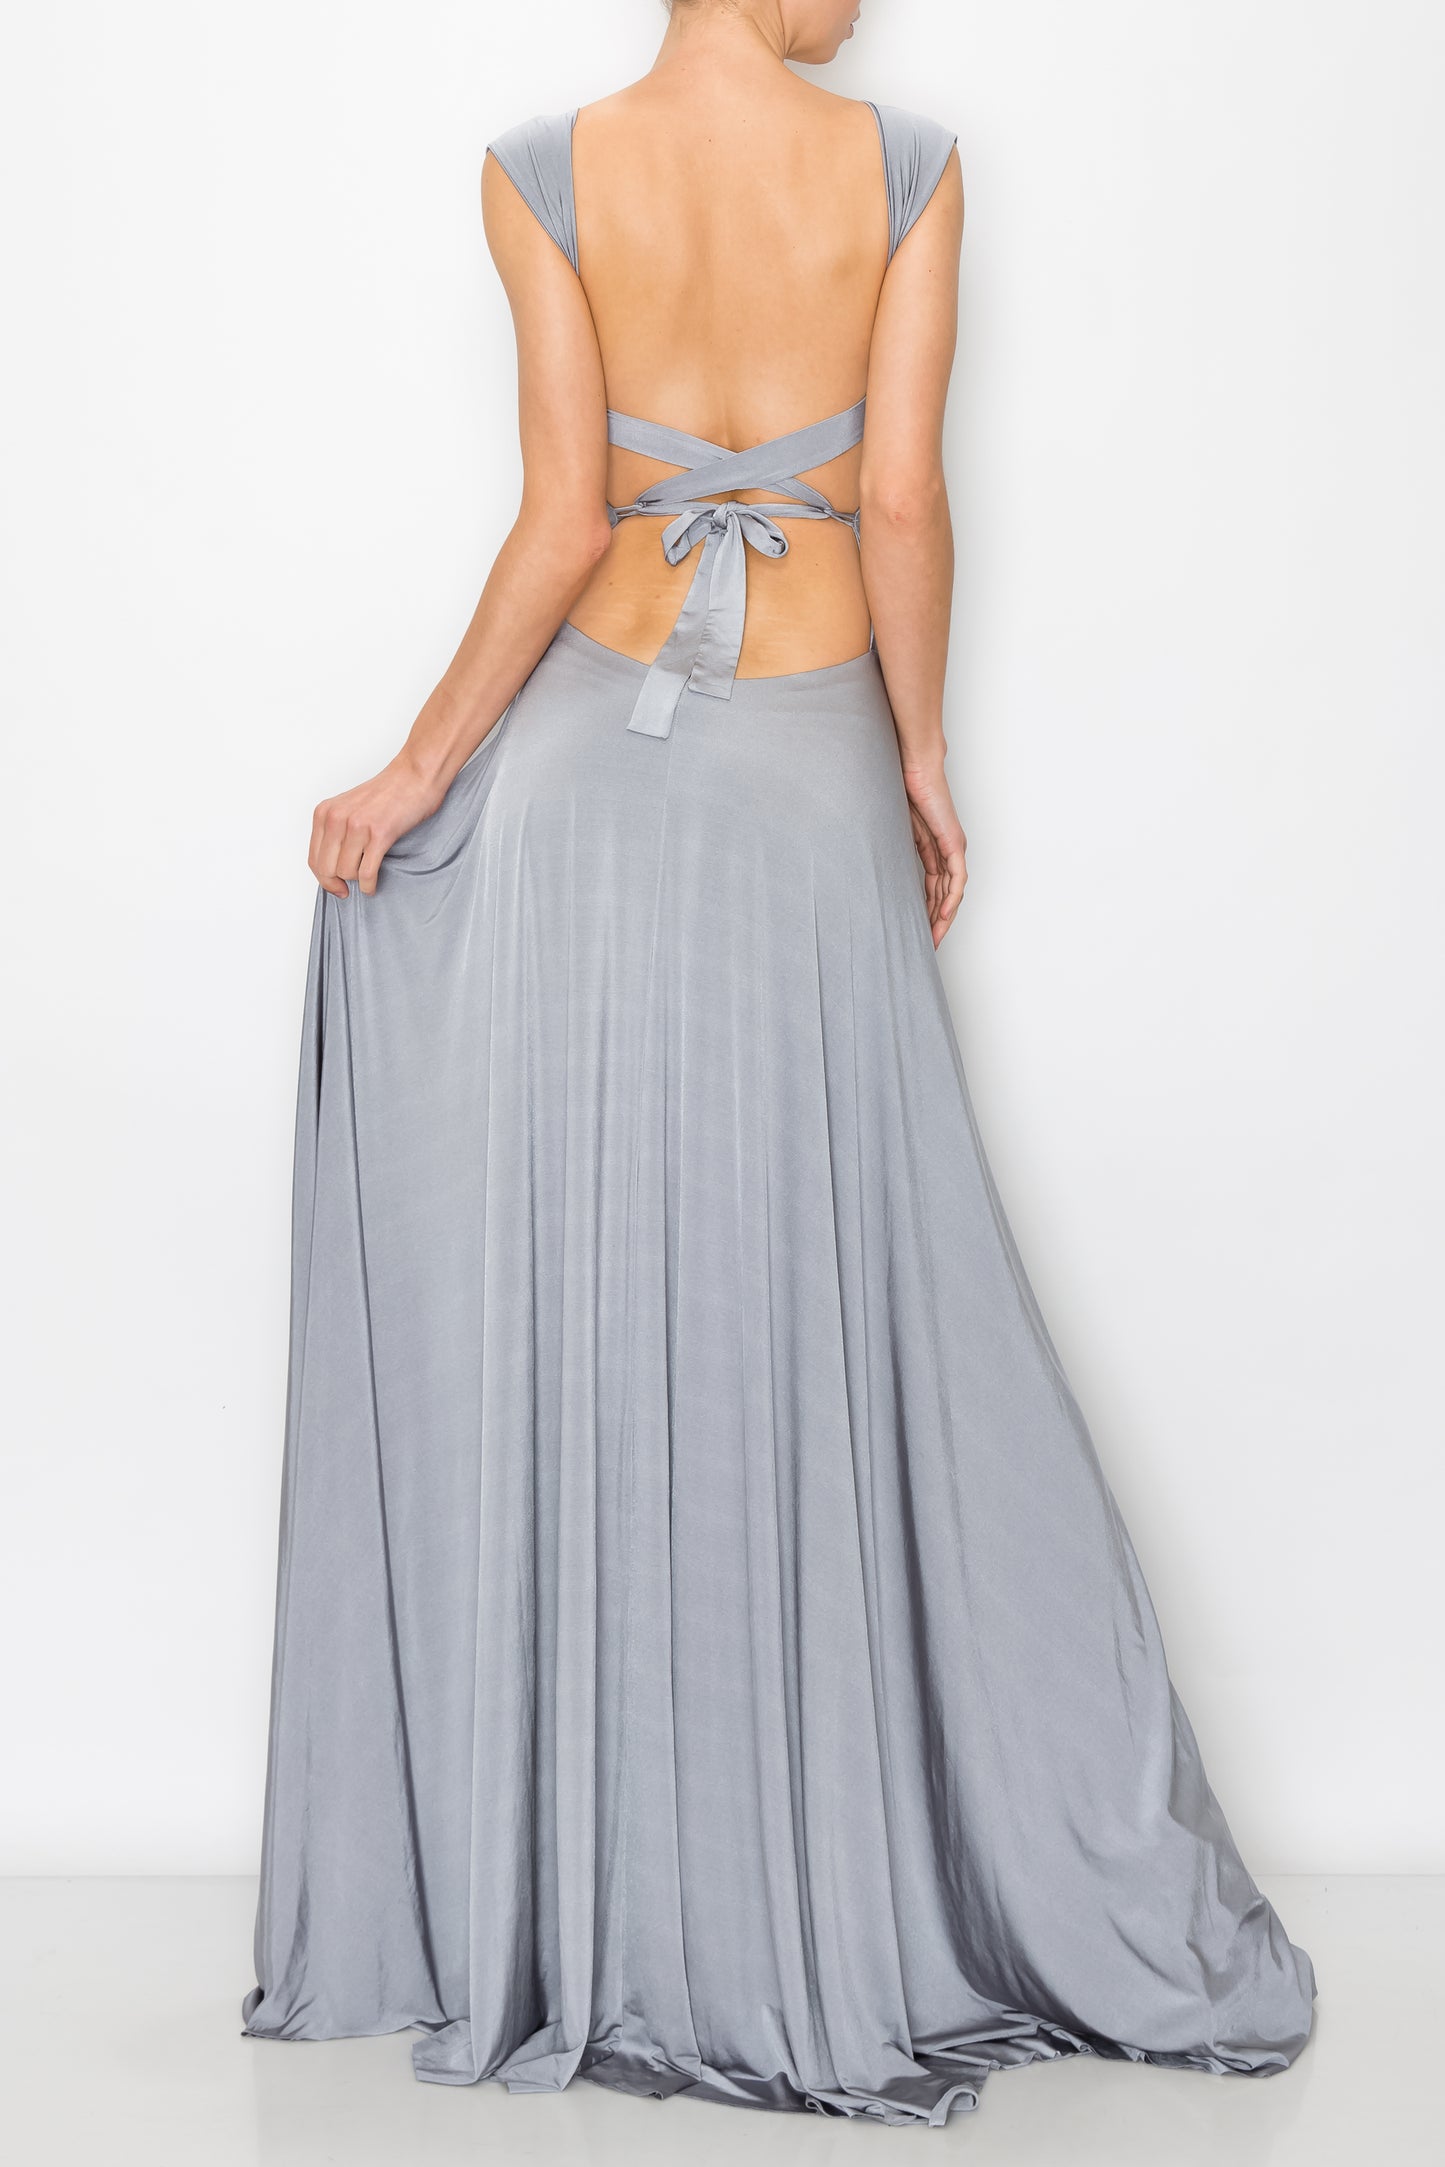 The Crush Gown